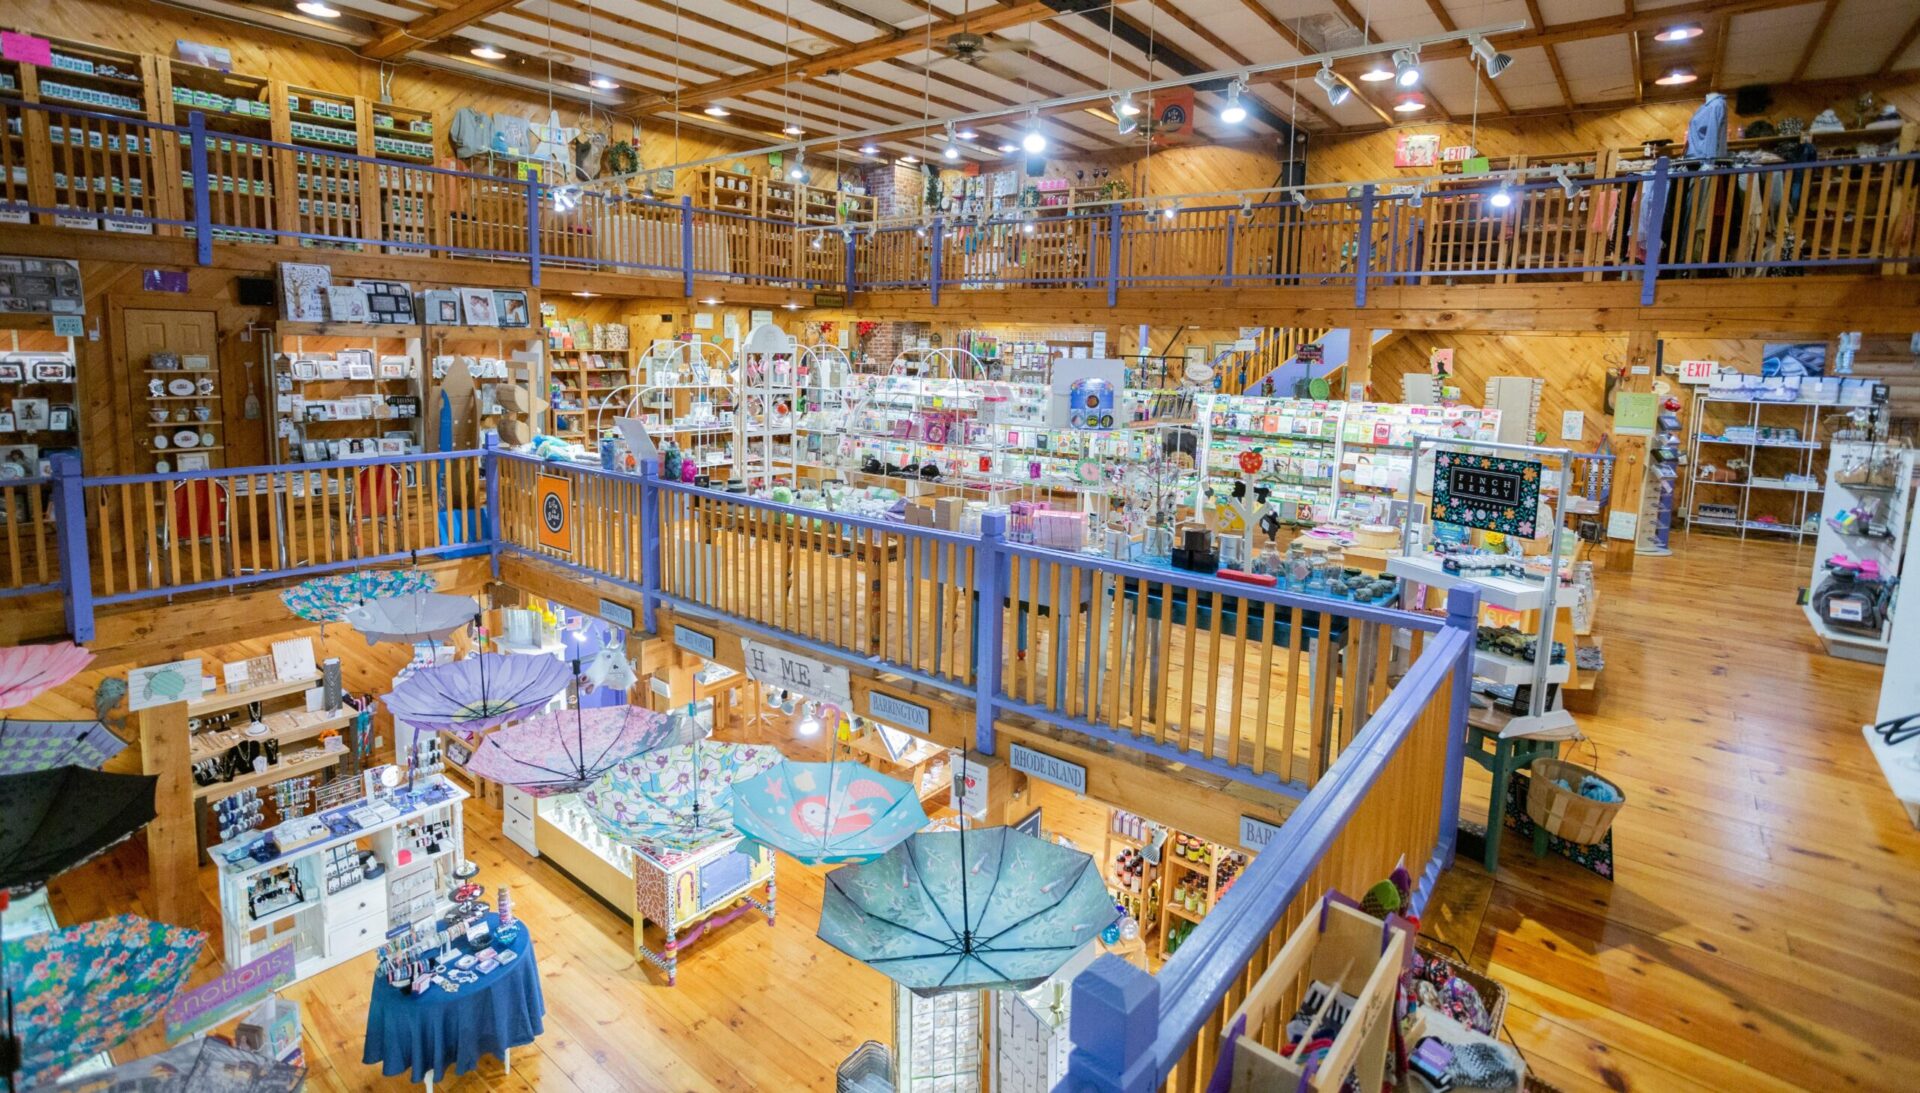 Interior of Imagine Gift Store showing many products across multiple levels